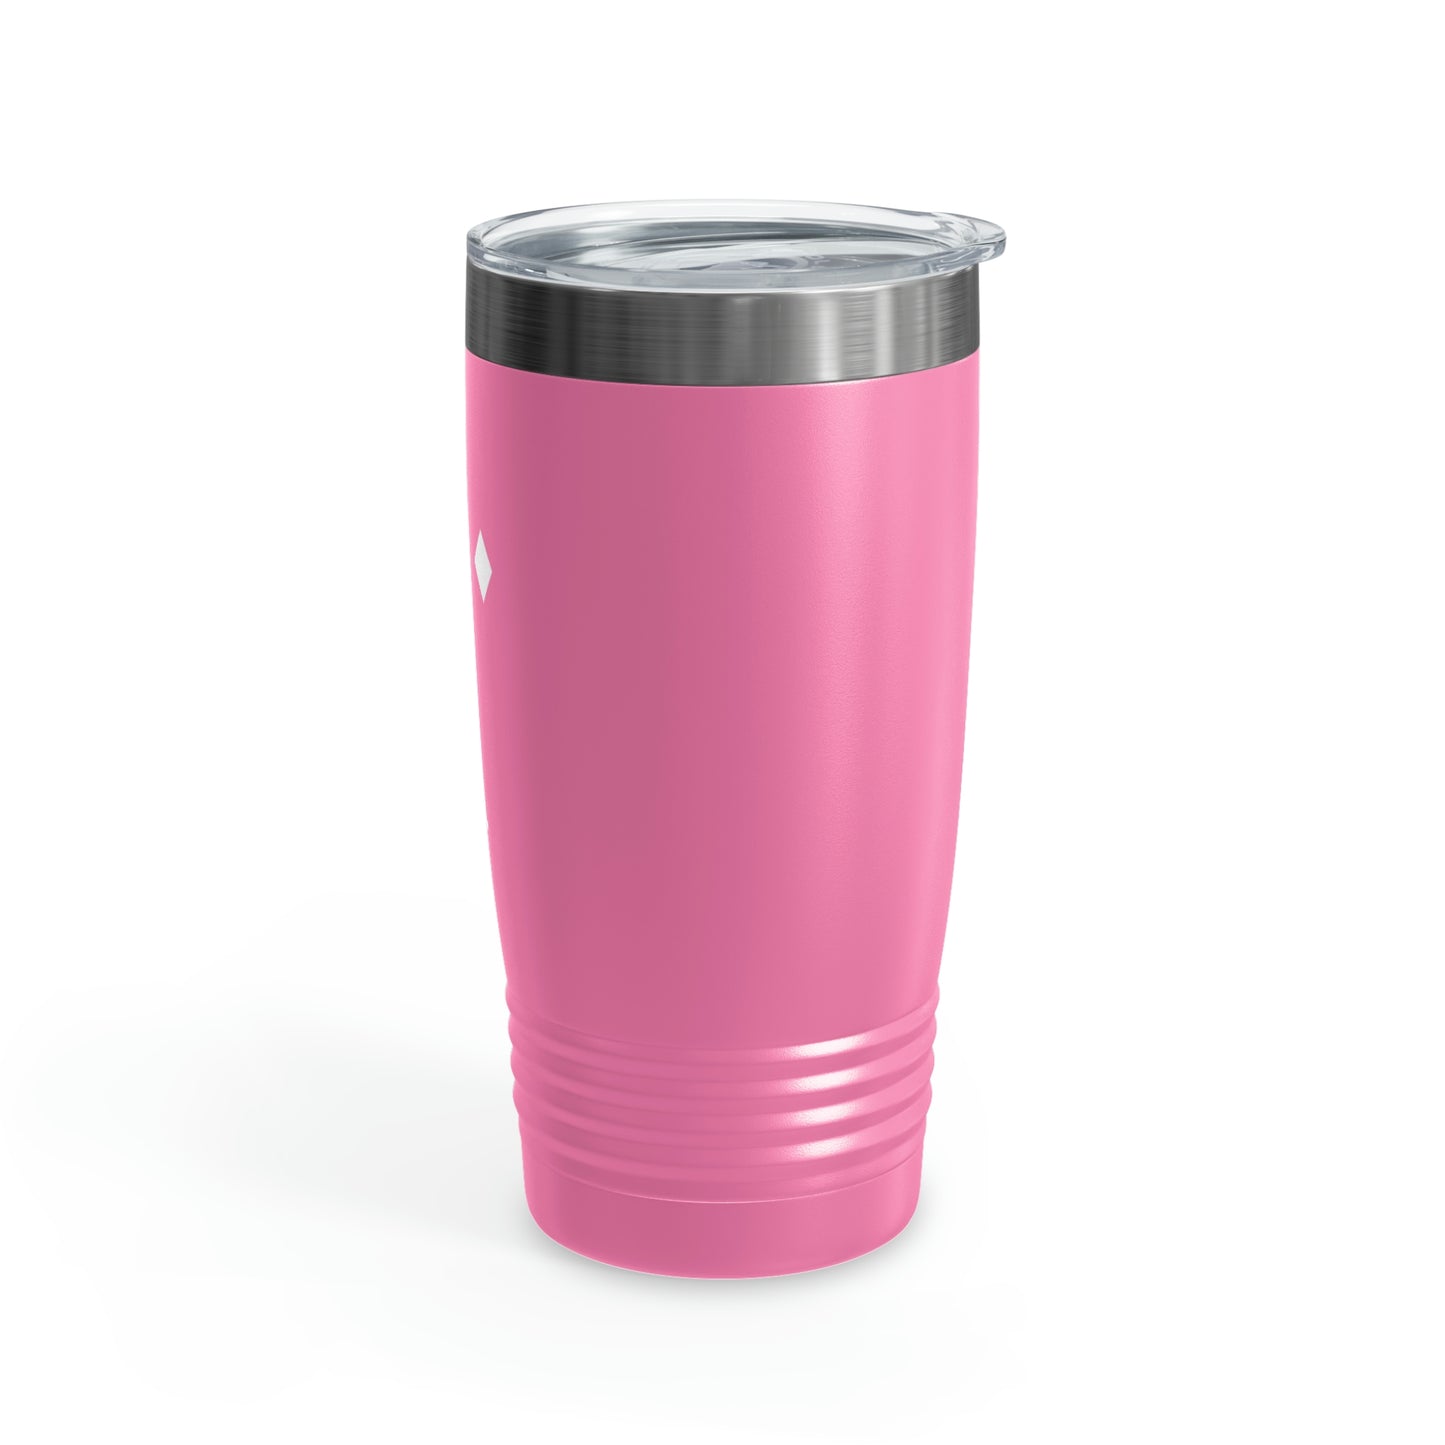 Retro Design Ringneck Tumbler. Drinkware and Accessories, Designed by a Teen in USA with our Custom Logo. Available only at ThirstFull.com. Prices start from $5.99 USD